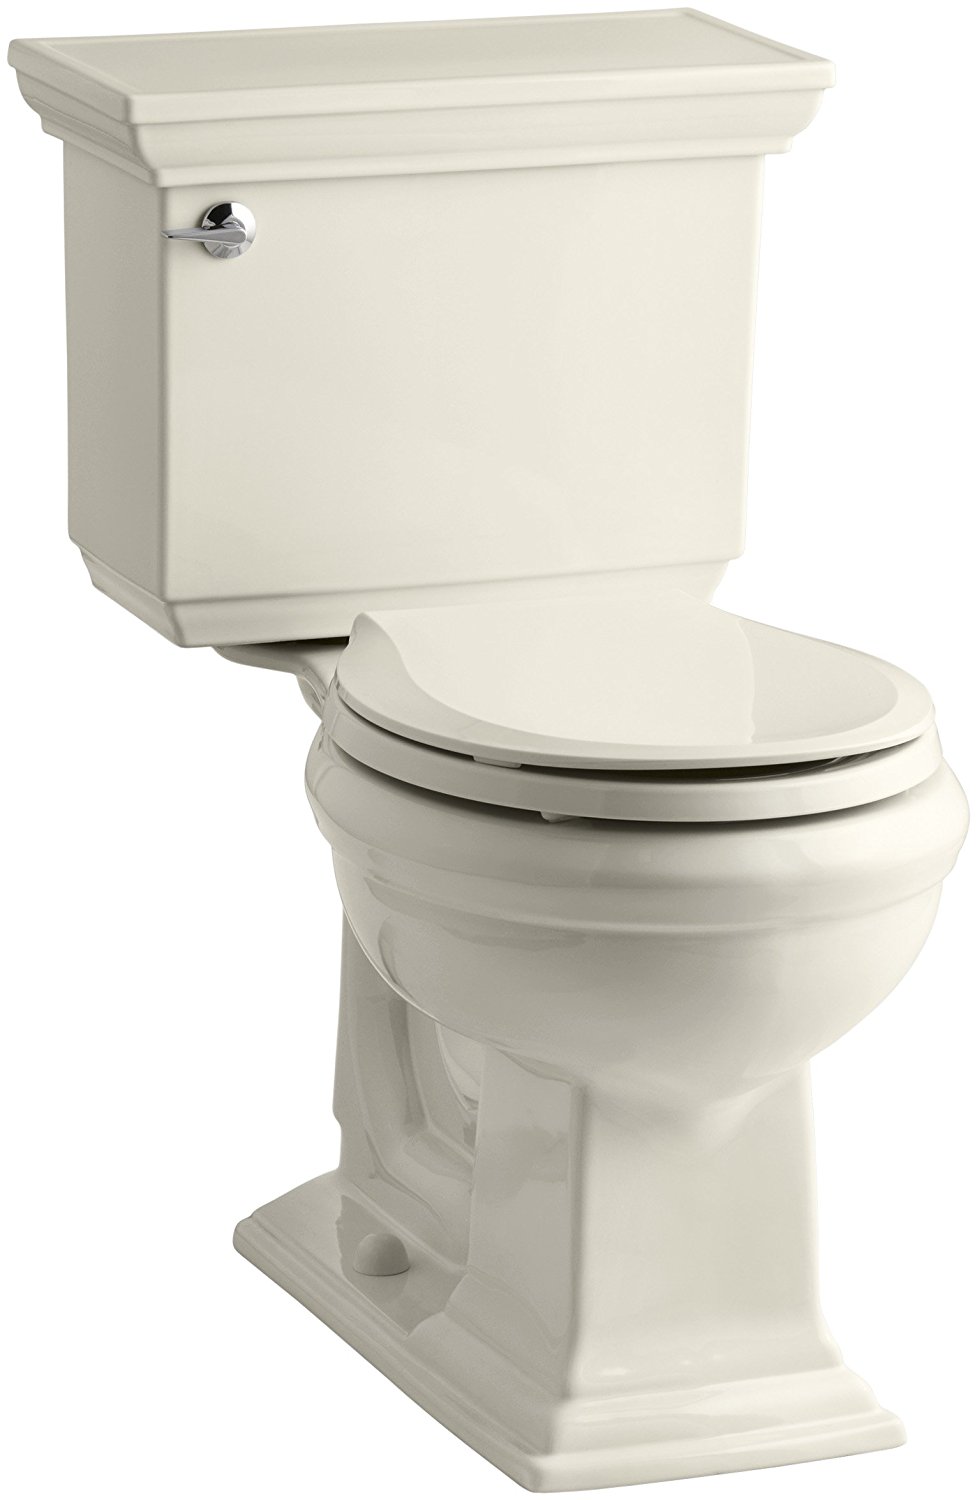 Kohler K-3933-47 Memoirs Comfort Height Two-Piece Round Front Toilet with Stately Design, Almond